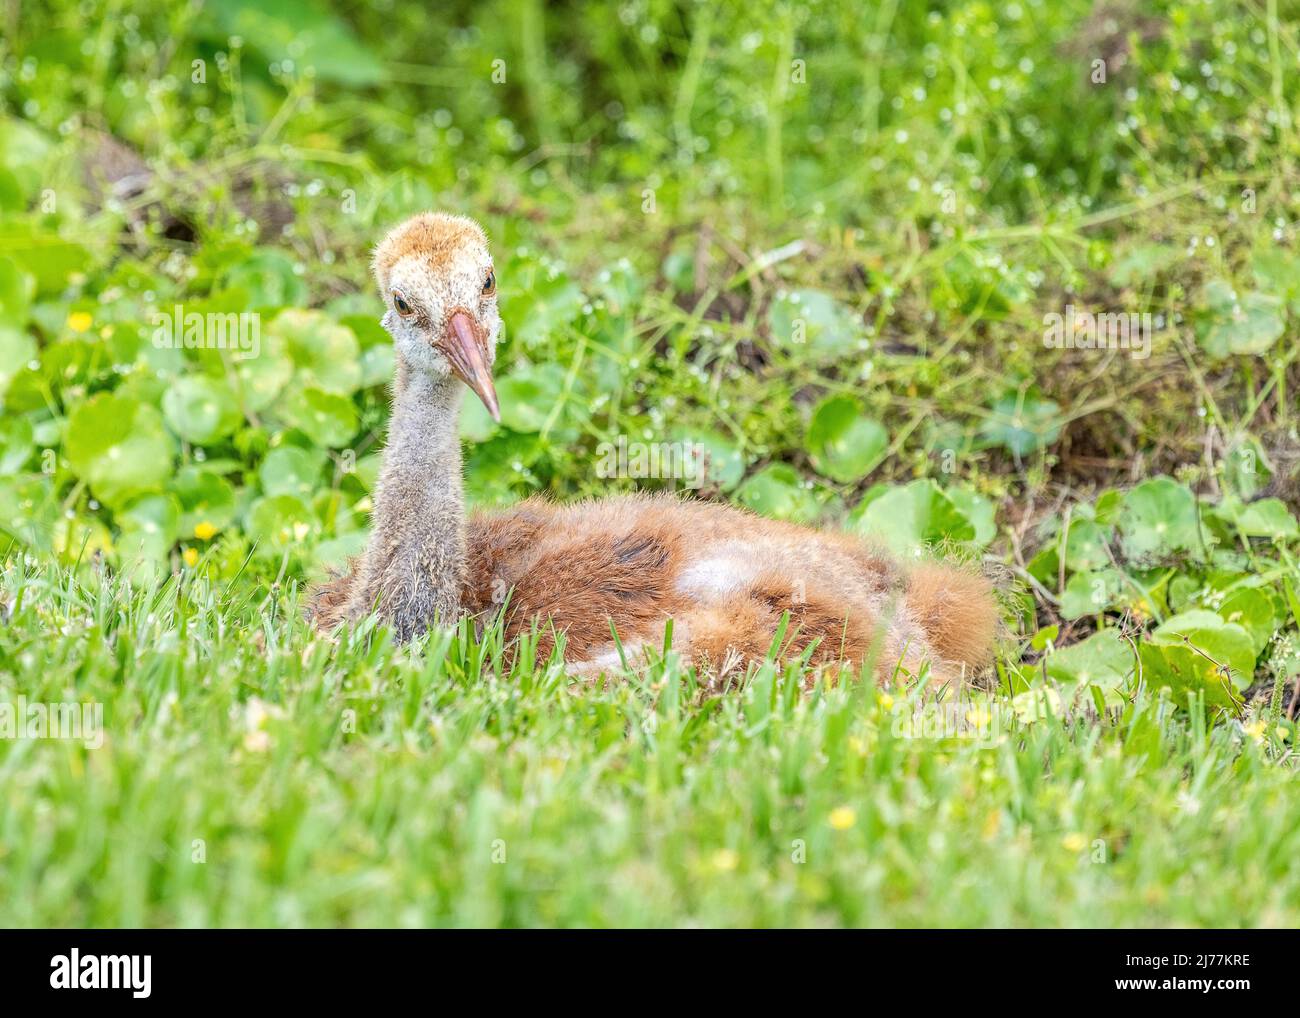 Adorable Sandhill crane colt resting along the trails at Sweetwater wetlands park in Gainesville, Florida Stock Photo